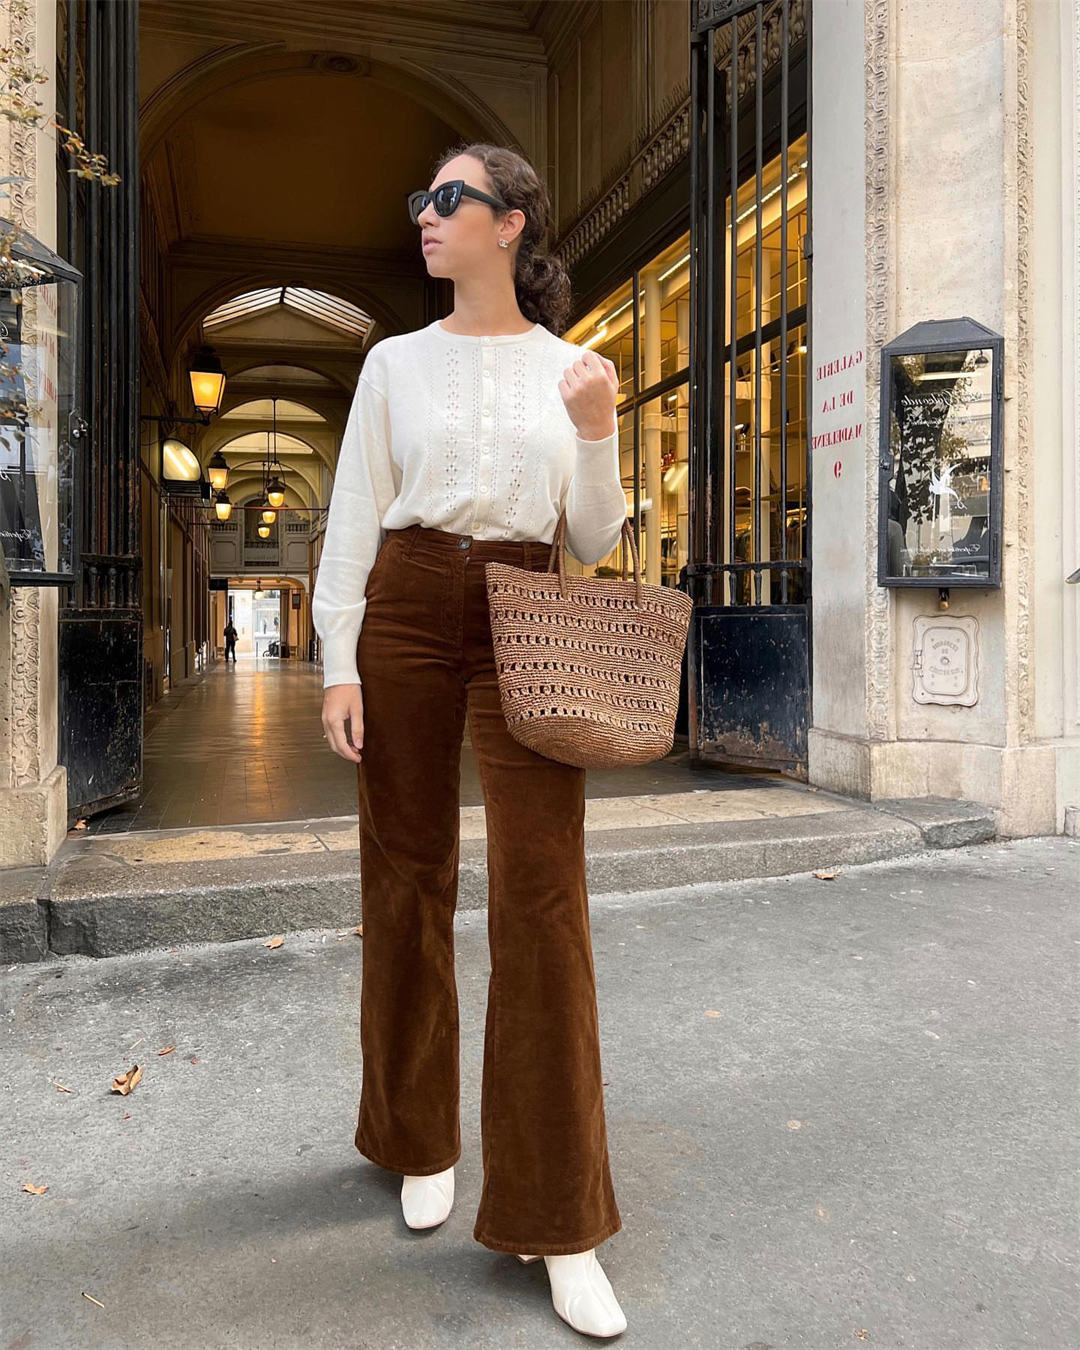 15 Top Ways on How to Wear to Corduroy Pants for Women  FMagcom